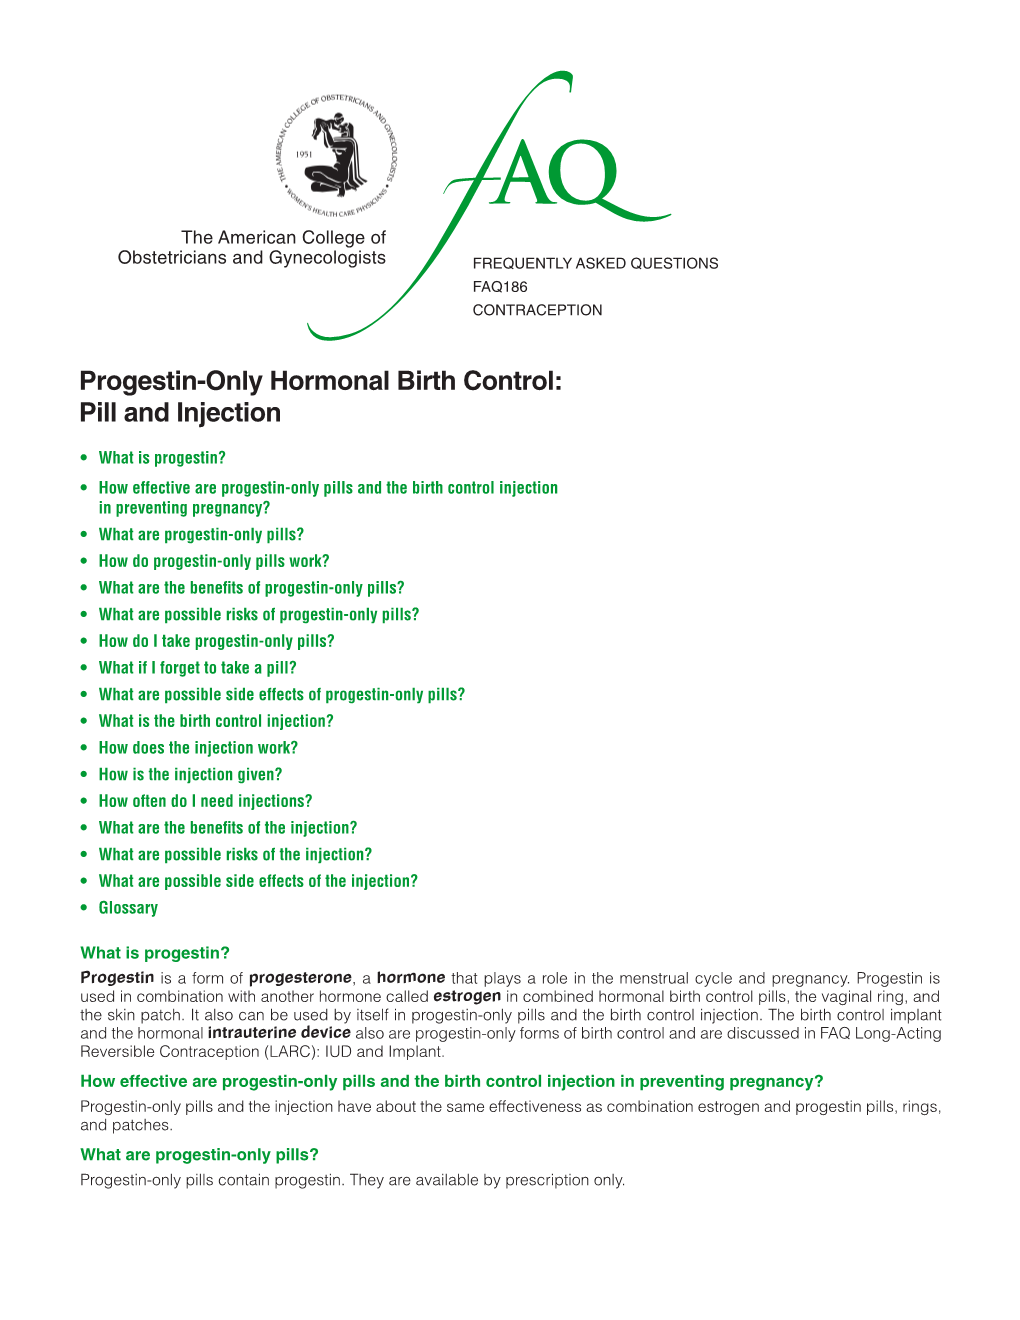 Progestin-Only Hormonal Birth Control: Pill and Injection